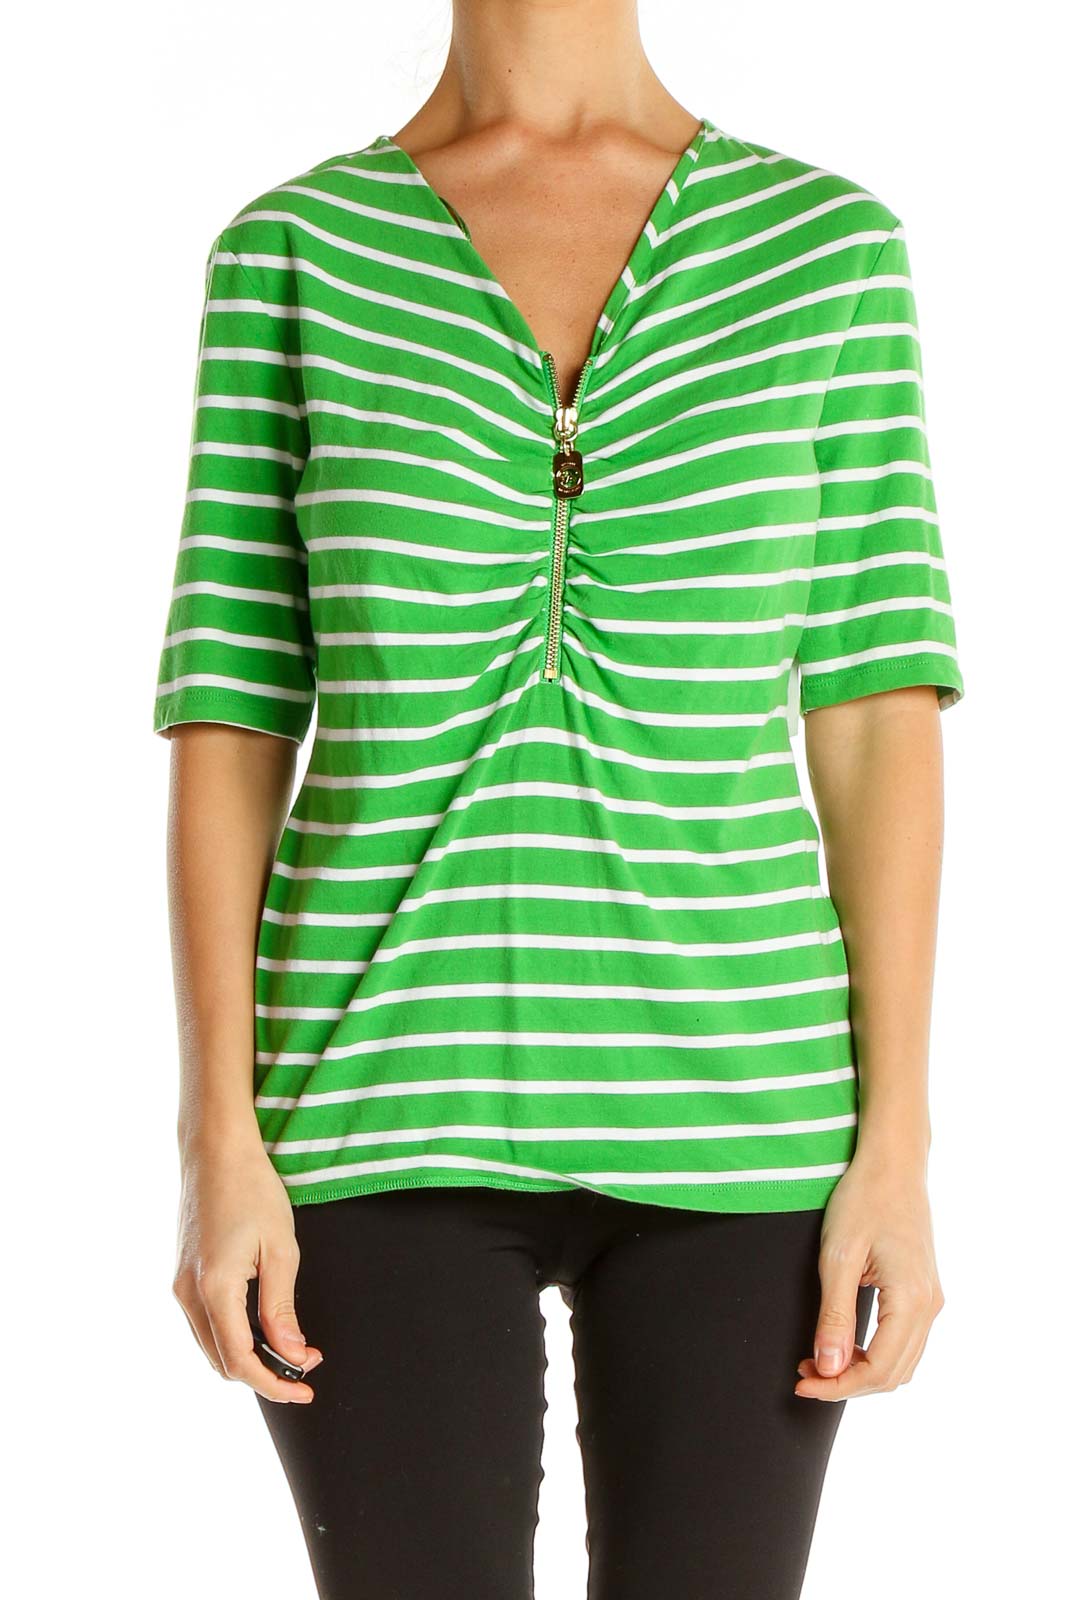 Green Striped Casual Top Front